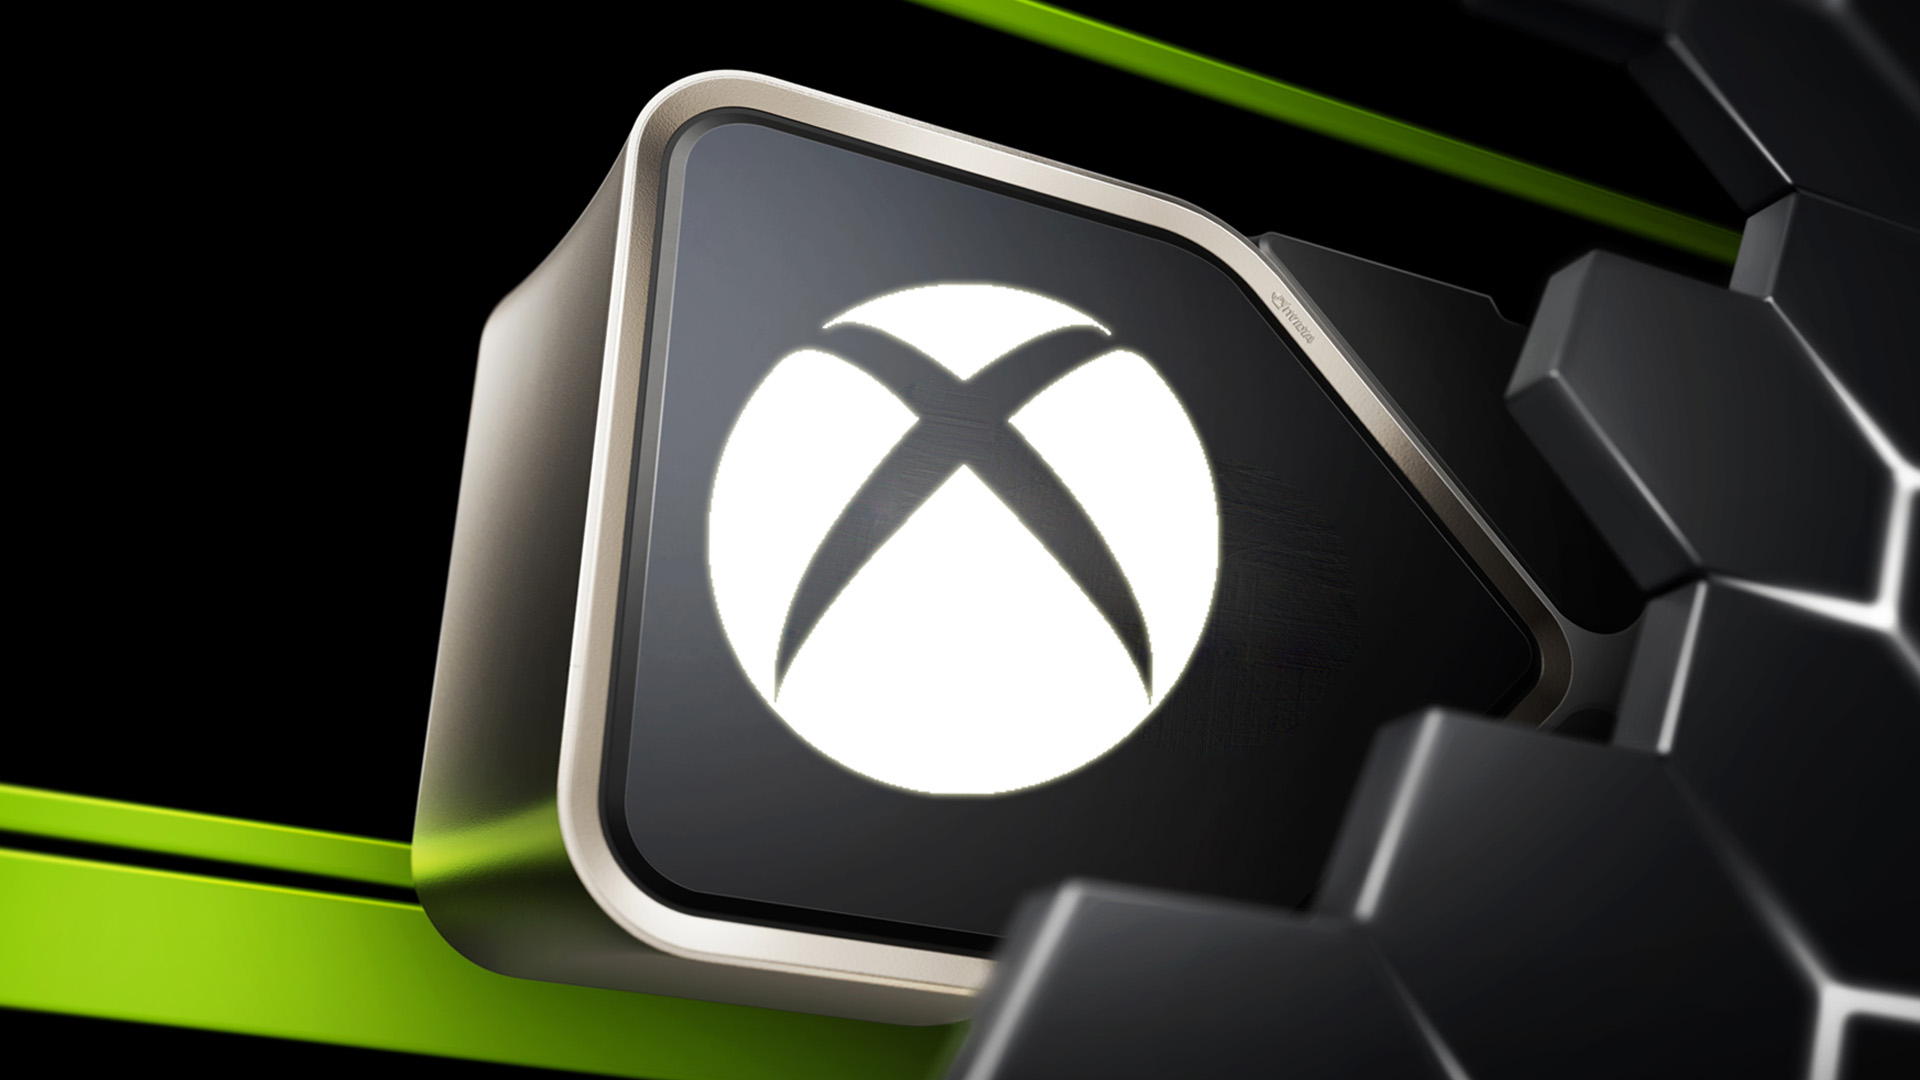 NVIDIA GeForce NOW to feature Xbox PC Games, Call of Duty to return to cloud  streaming service 